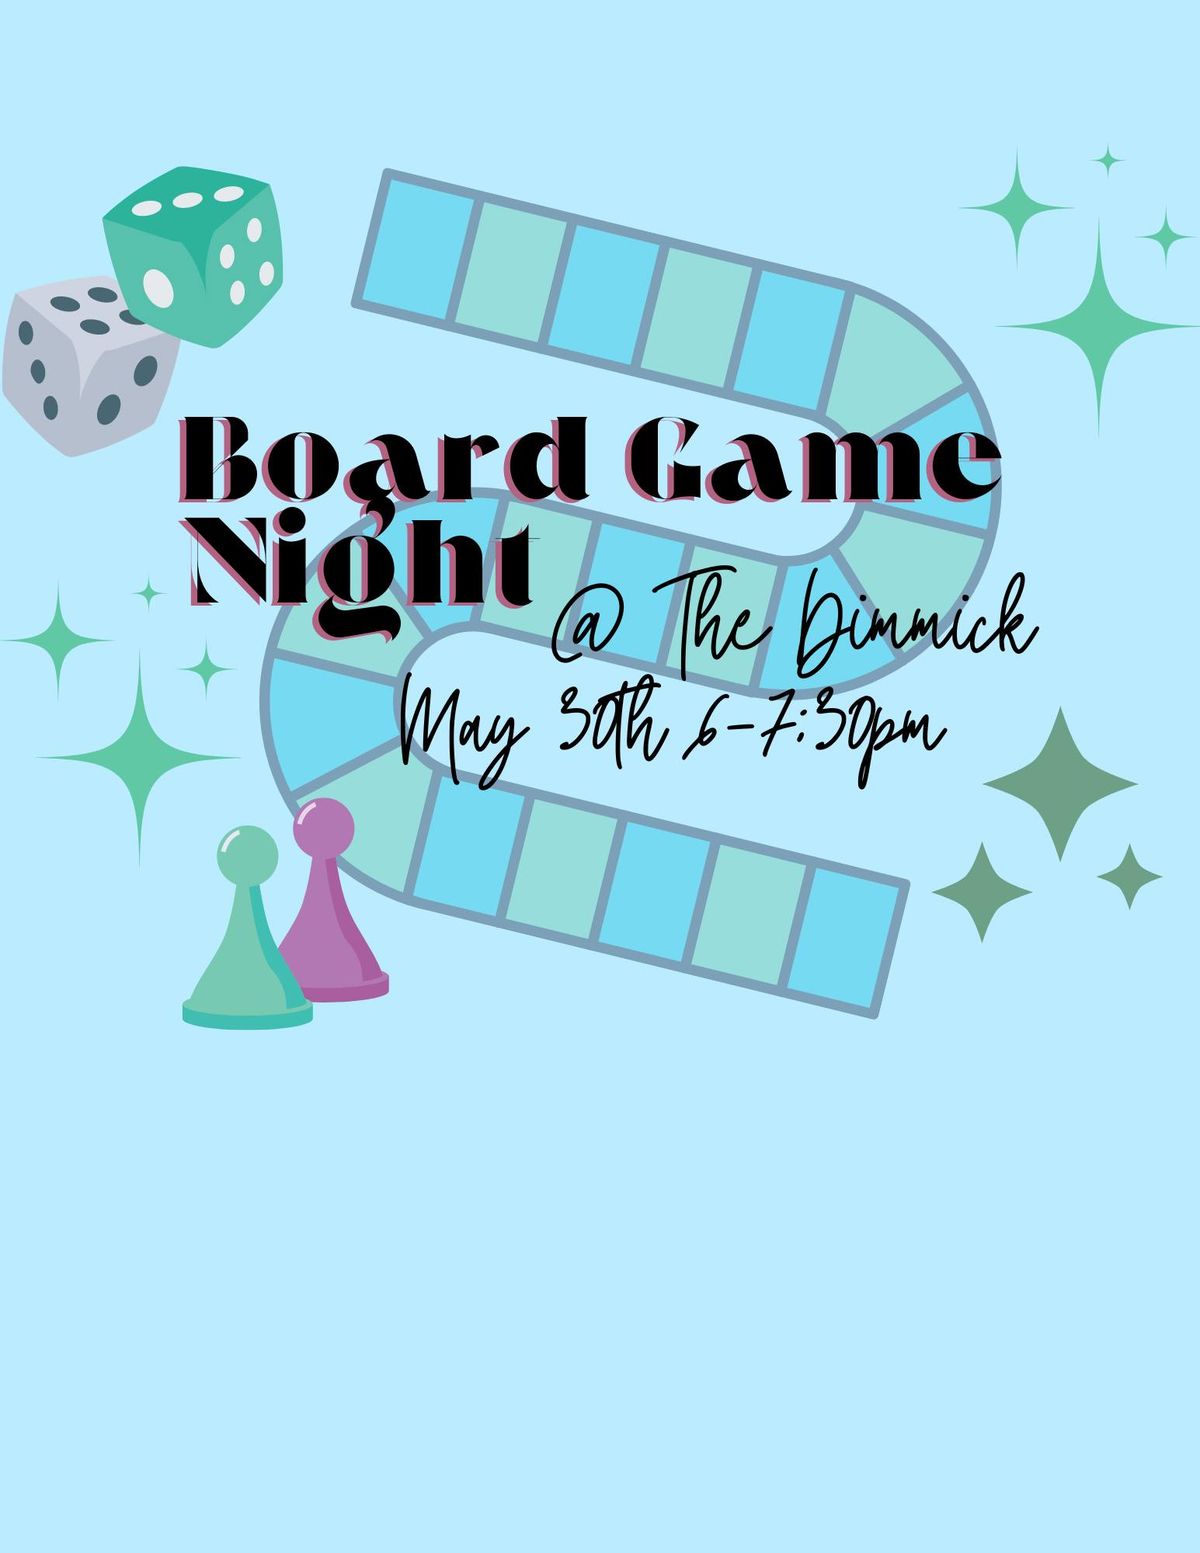 Board Game Night at the Dimmick